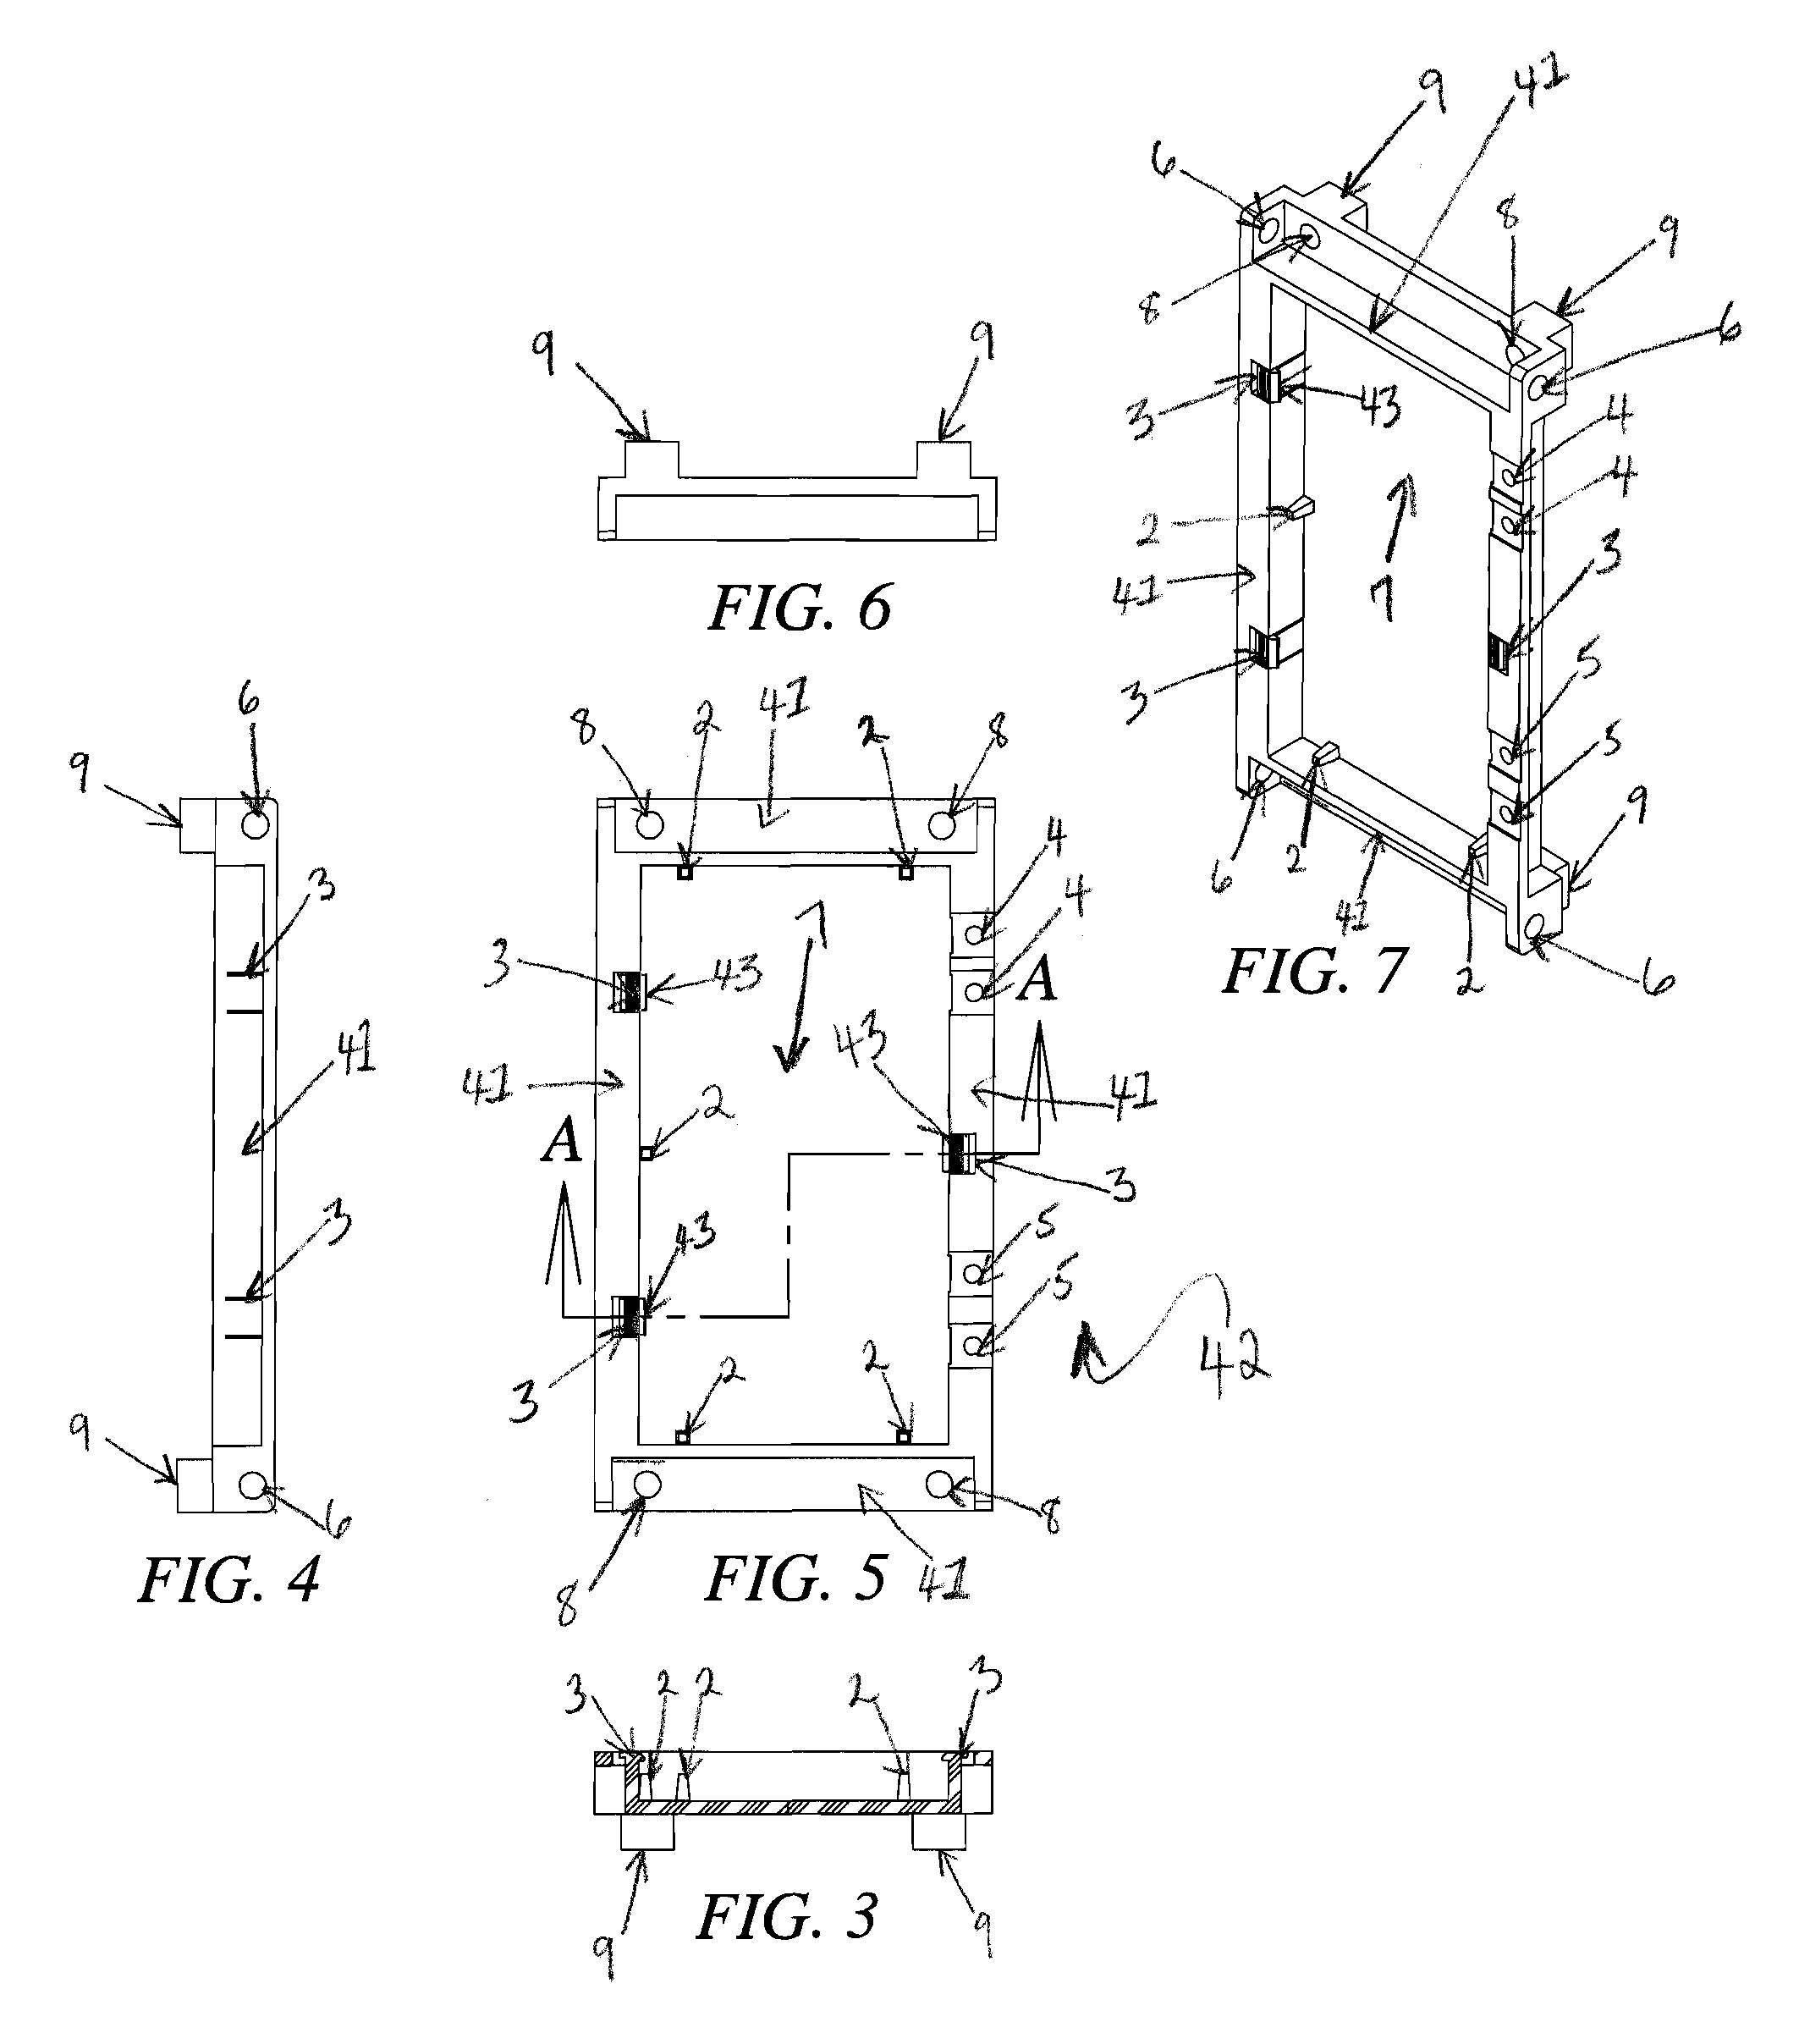 Power conversion device frame packaging apparatus and methods